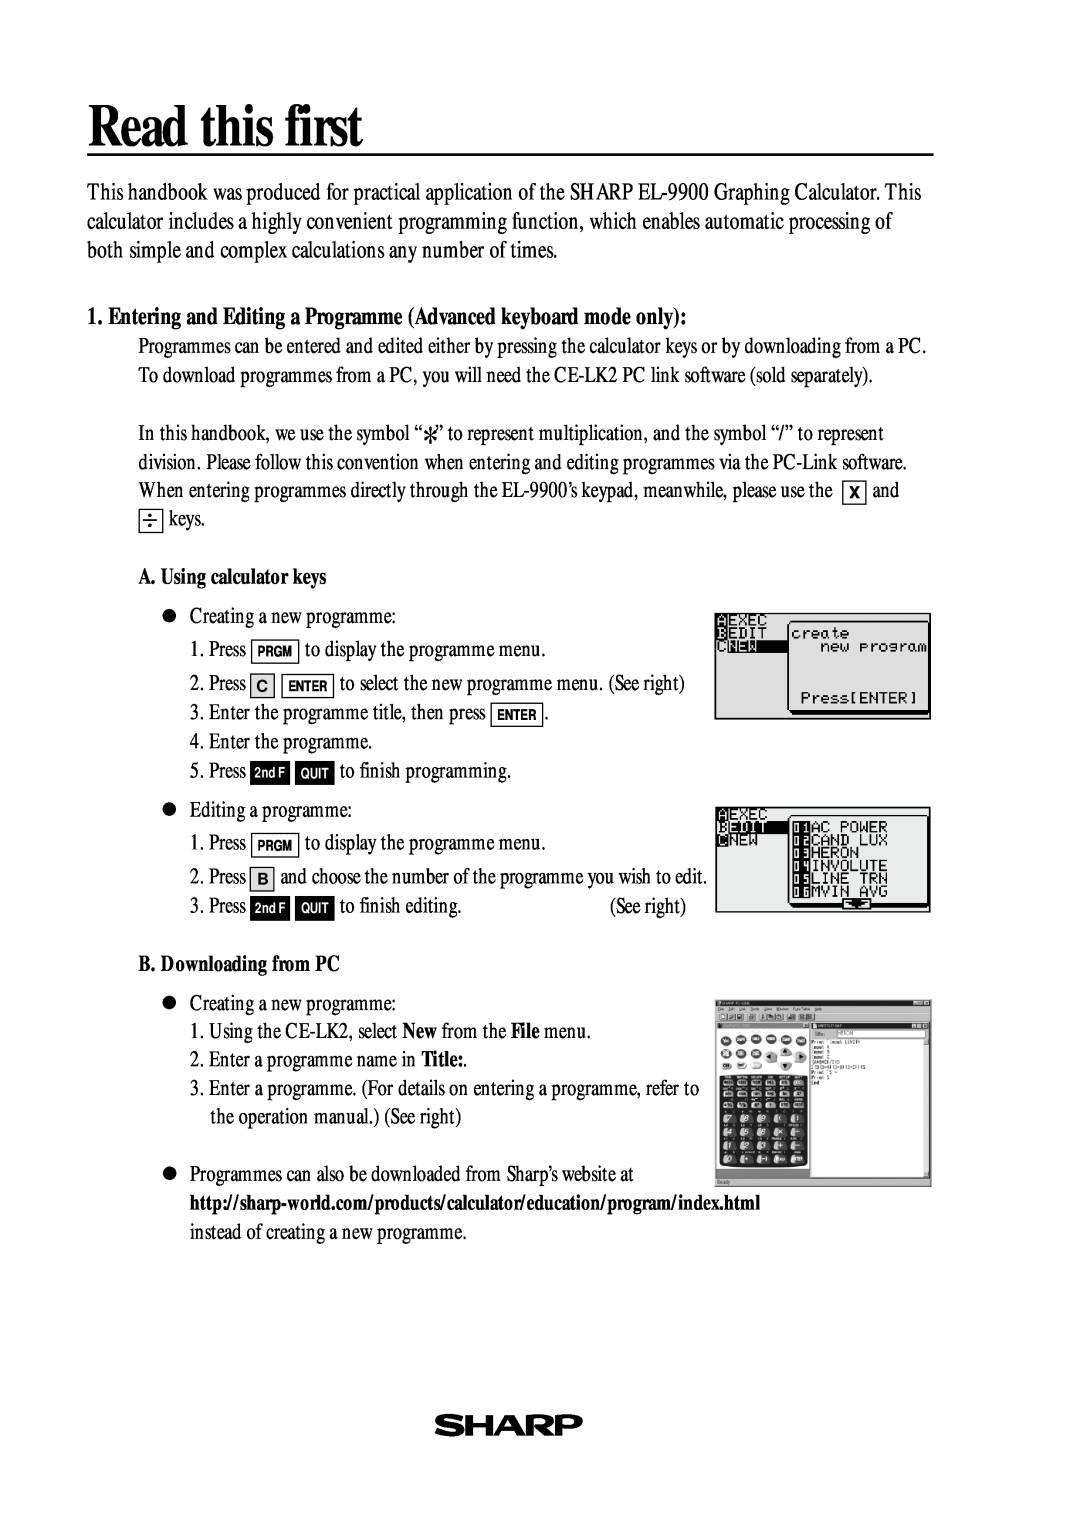 Sharp EL-9900 Read this first, Entering and Editing a Programme Advanced keyboard mode only, A. Using calculator keys 